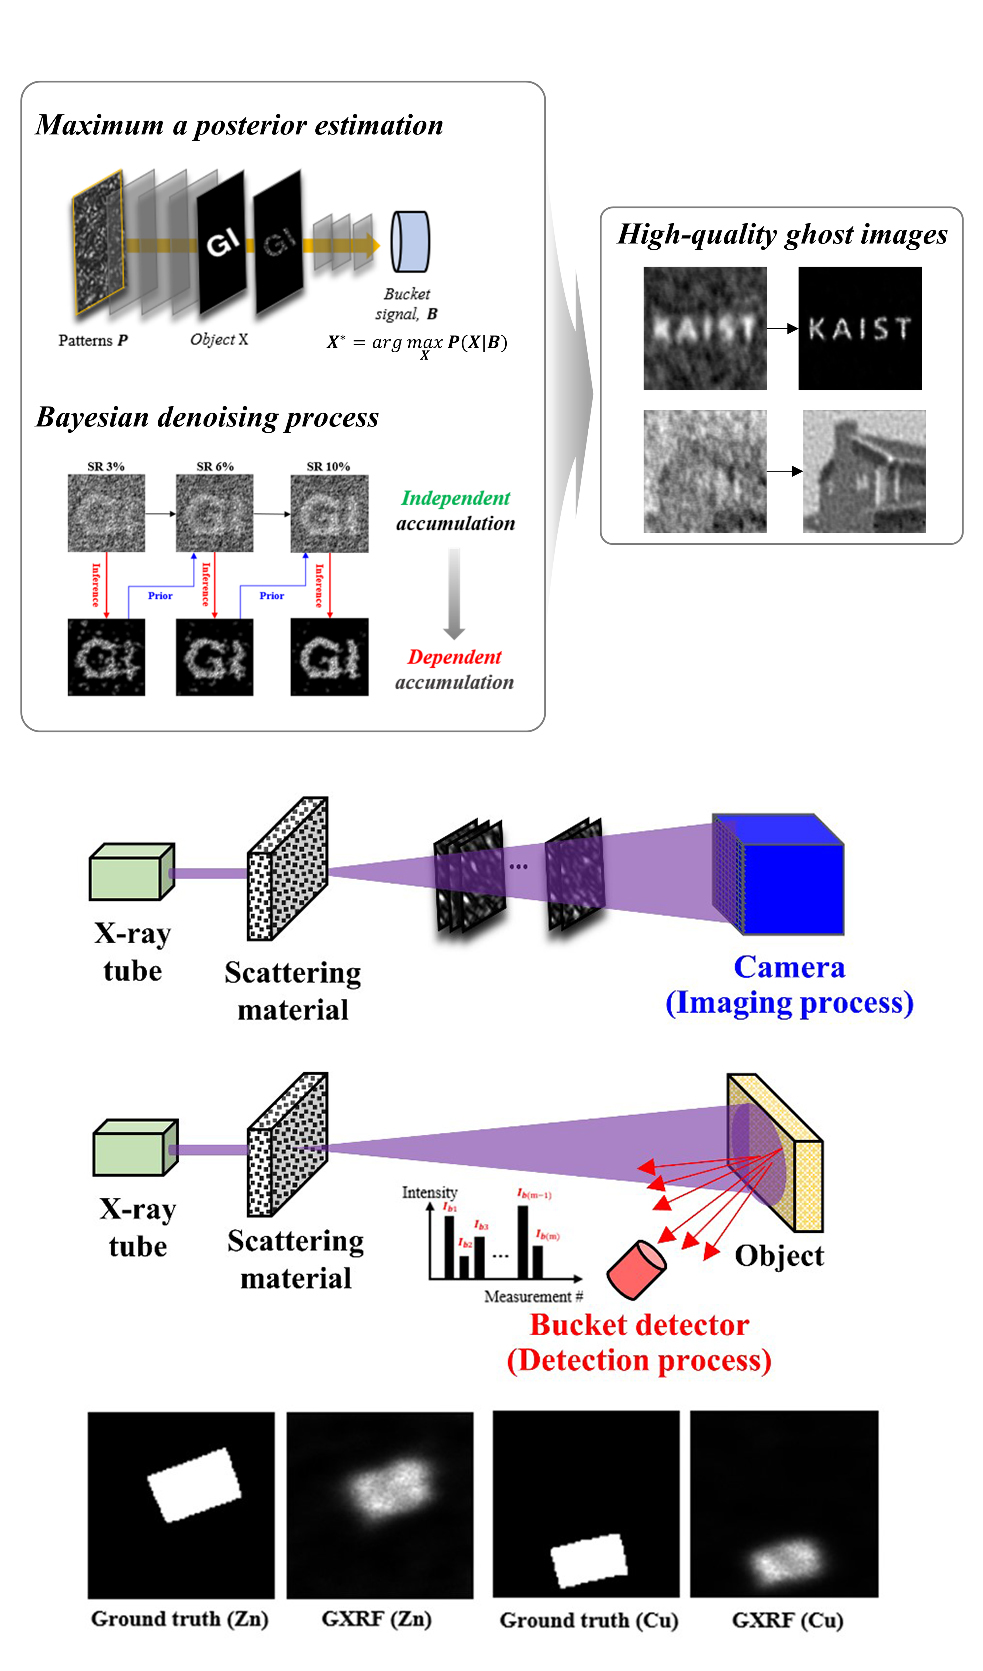 Schematic of a ghost imaging-based X-ray fluorescence system for mapping element distributions and examples of element distributions (Zn and Cu).